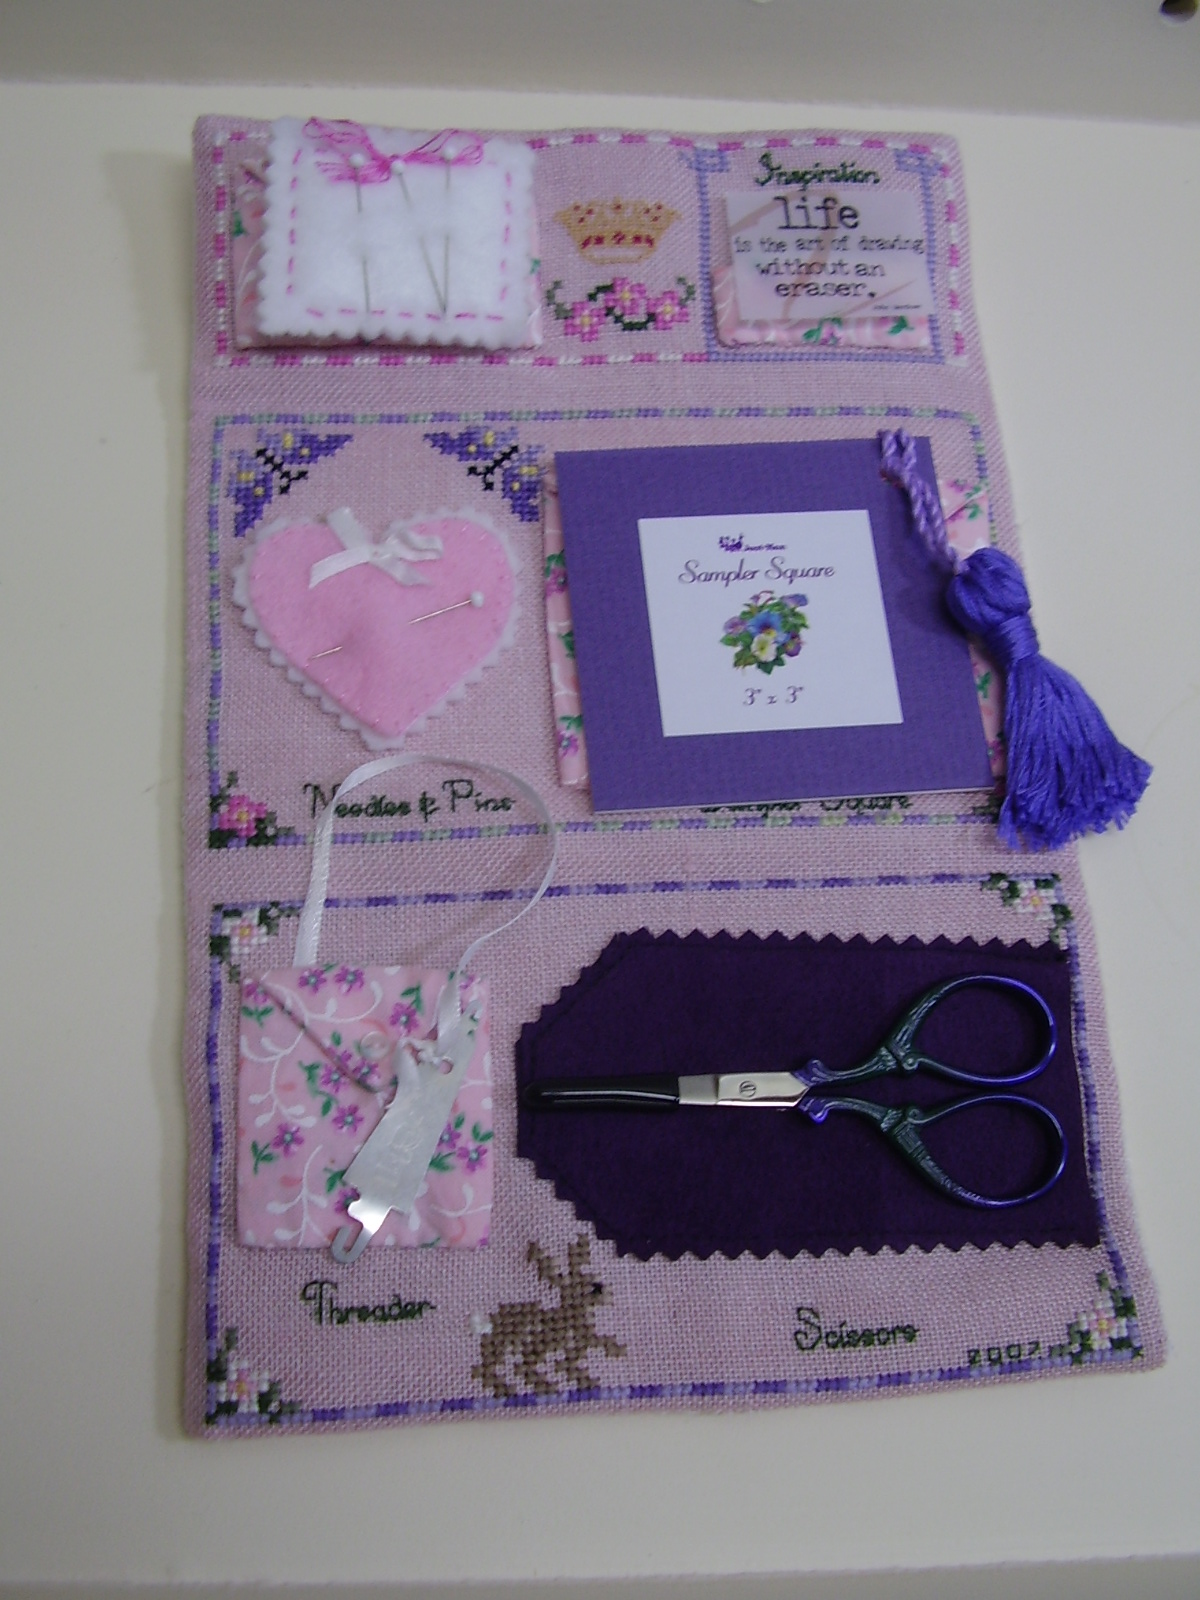 [Queen+of+the+Needle+Sampler+Sewing+Case+View+5+by+Just+Nan.JPG]